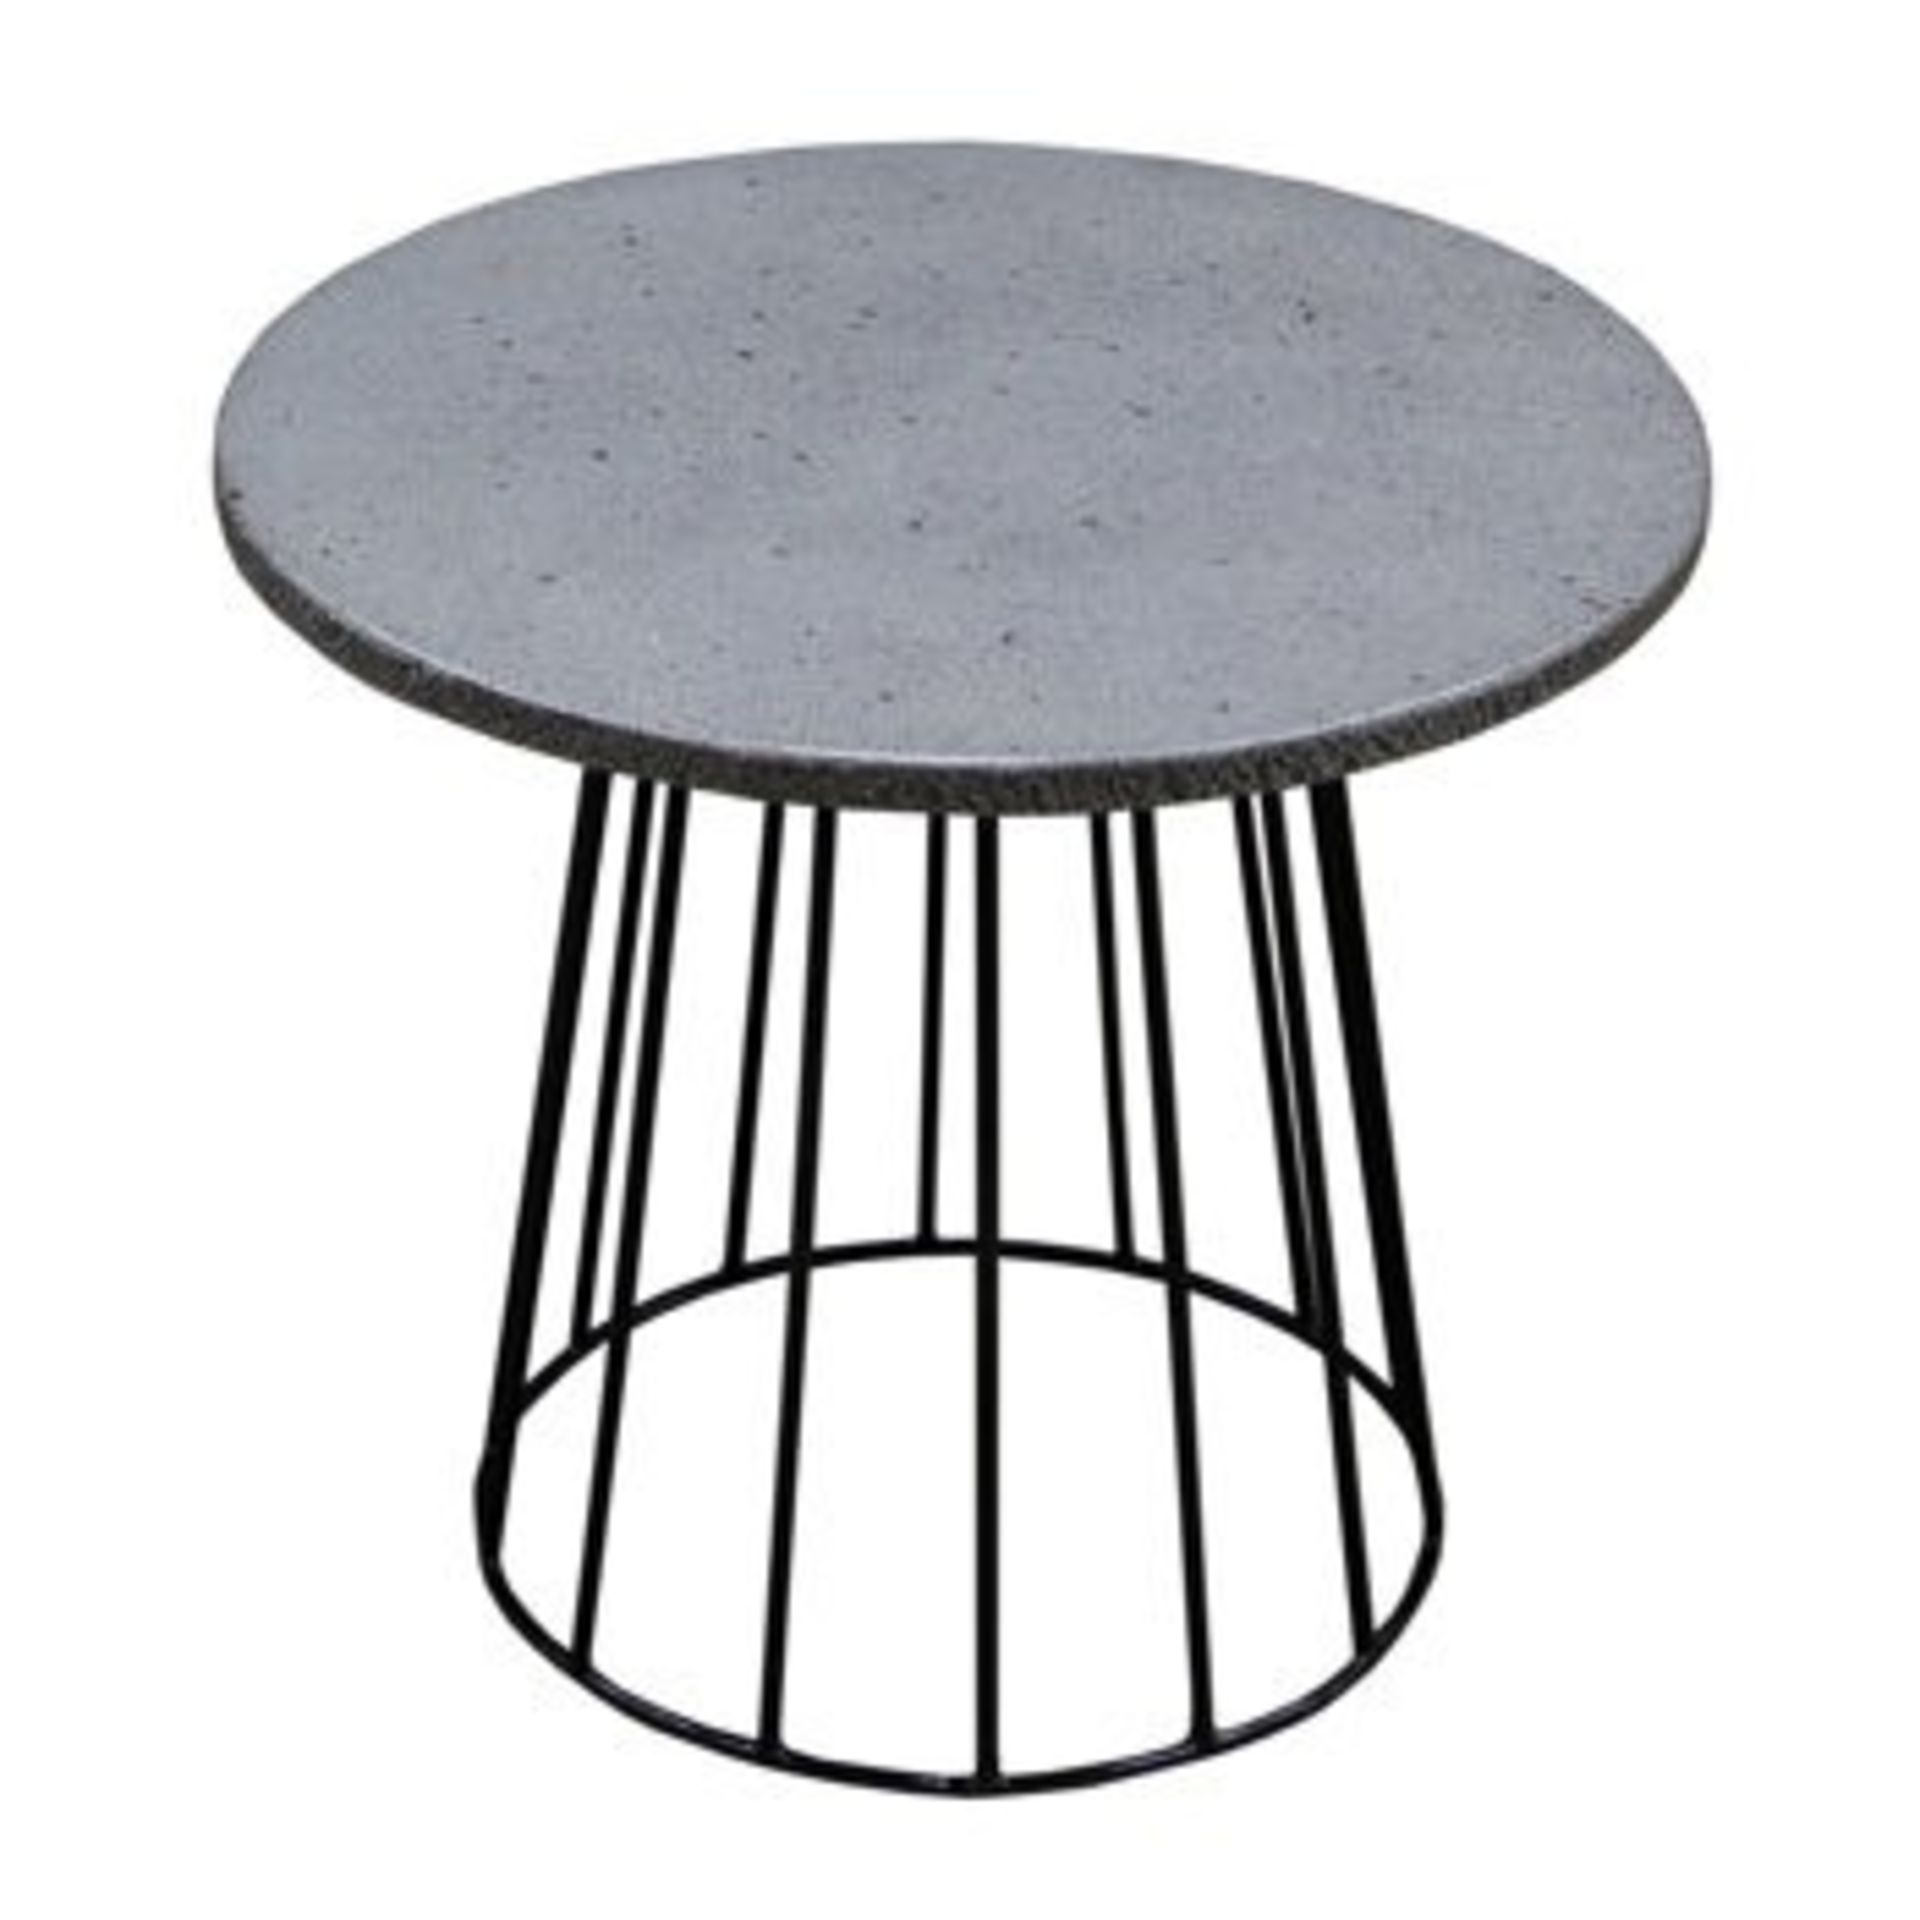 1 GRADE A BOXED GRONA GREY AND BLACK ROUND LAMP TABLE / RRP £129.00 (VIEWING HIGHLY RECOMMENDED)